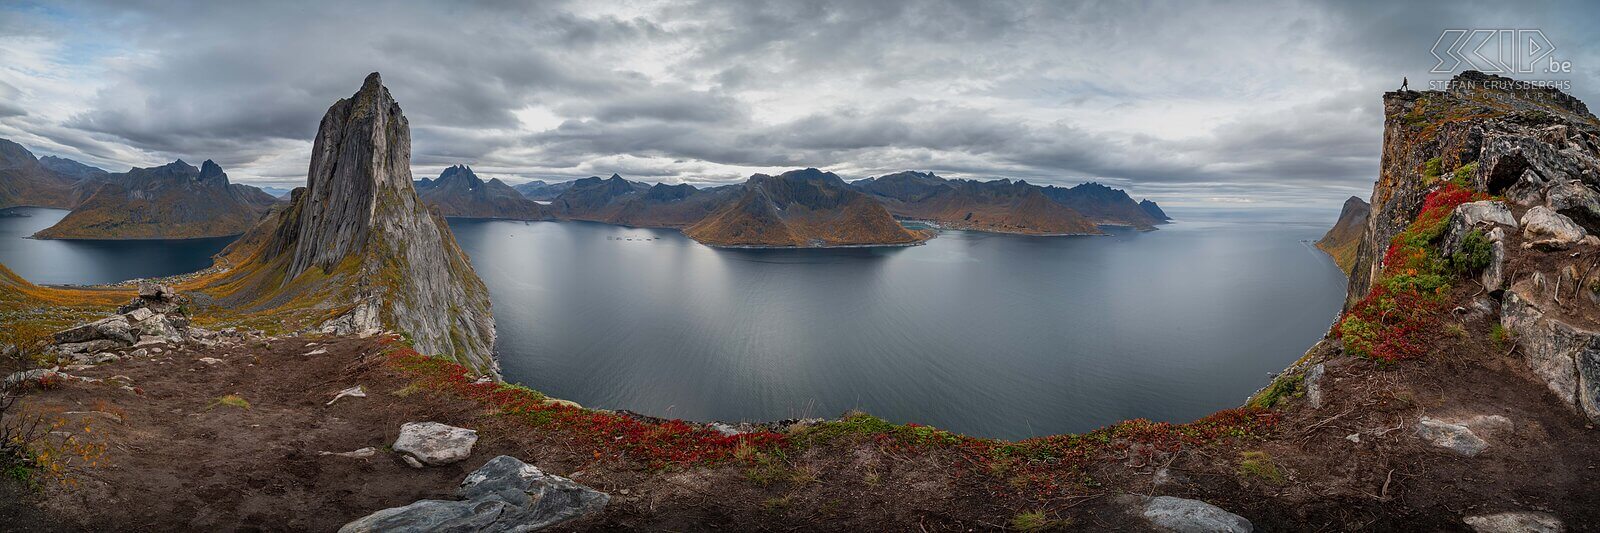 Senja - Segla - Panorama Panoramic image with the Segla on the lef, the Mefjorden and the town of Senjahopen accros the fjord and the Hesten Stefan Cruysberghs